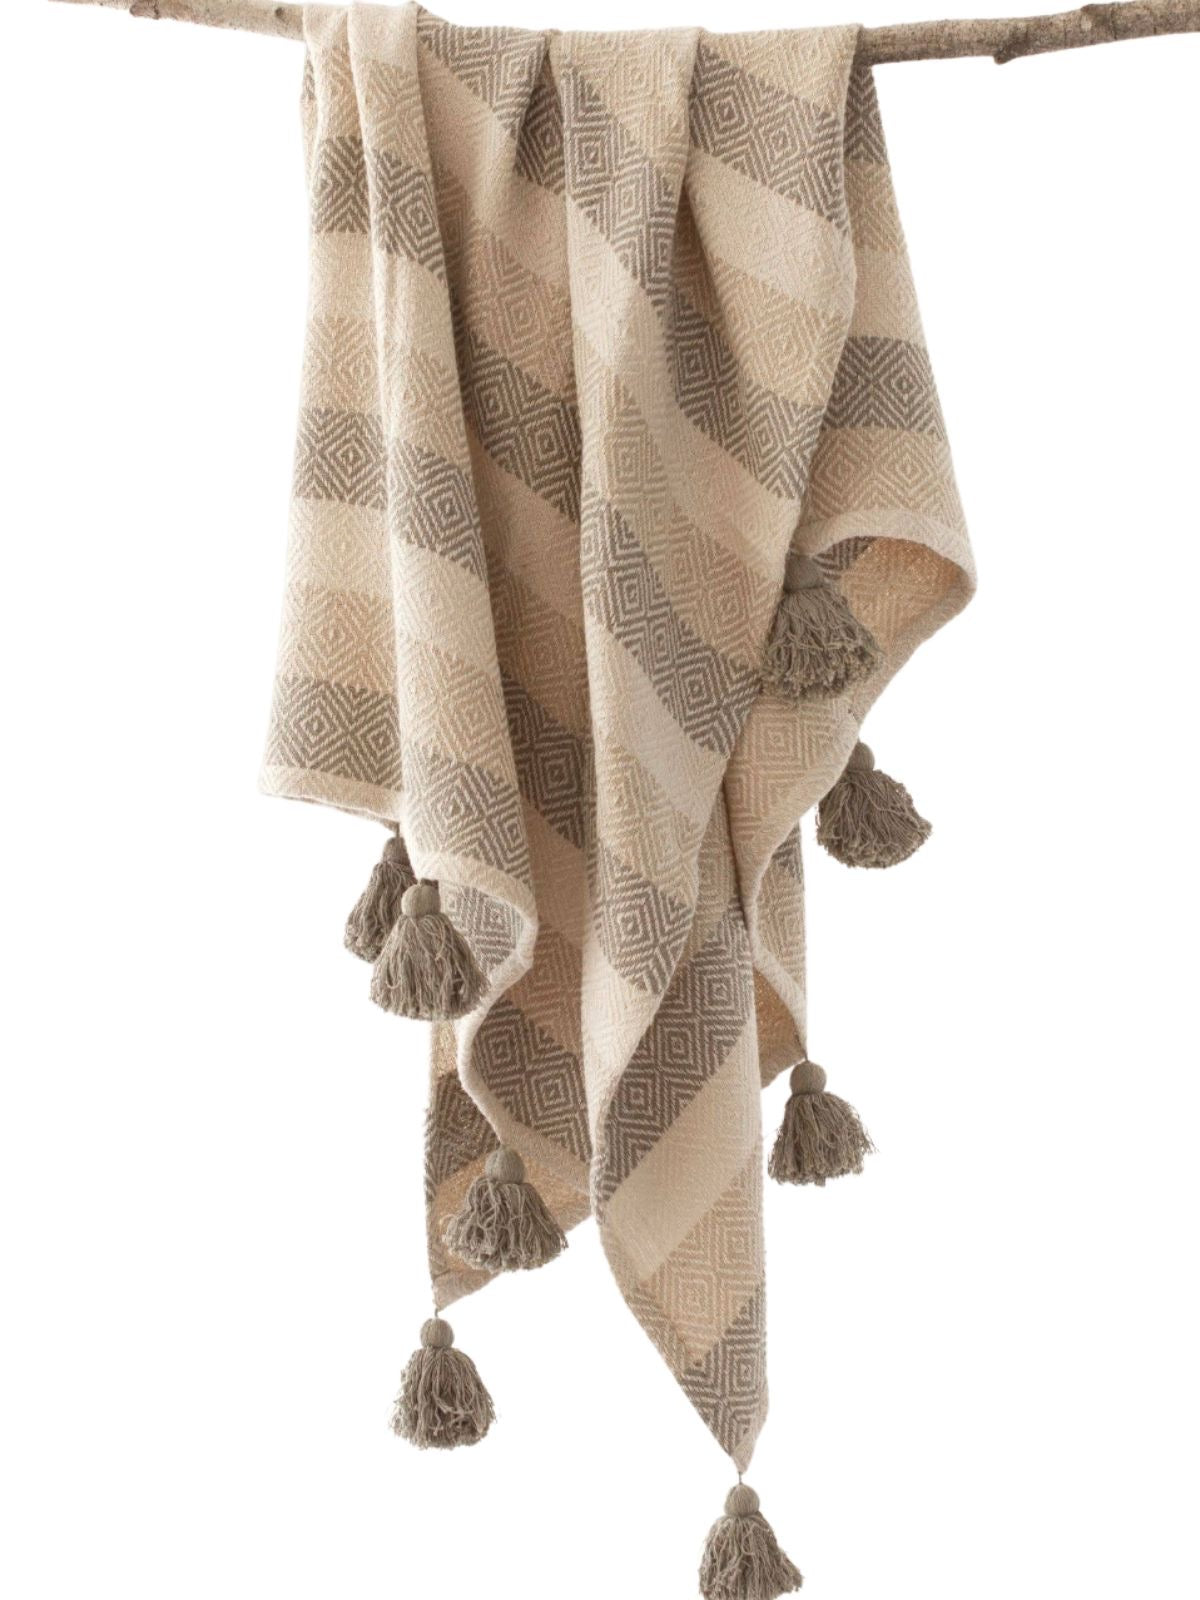 100% Cotton Oversized Wide Striped Cotton Throw Decorative Throw Blanket Available in Luxurious Khaki Color, 50W x 72L.